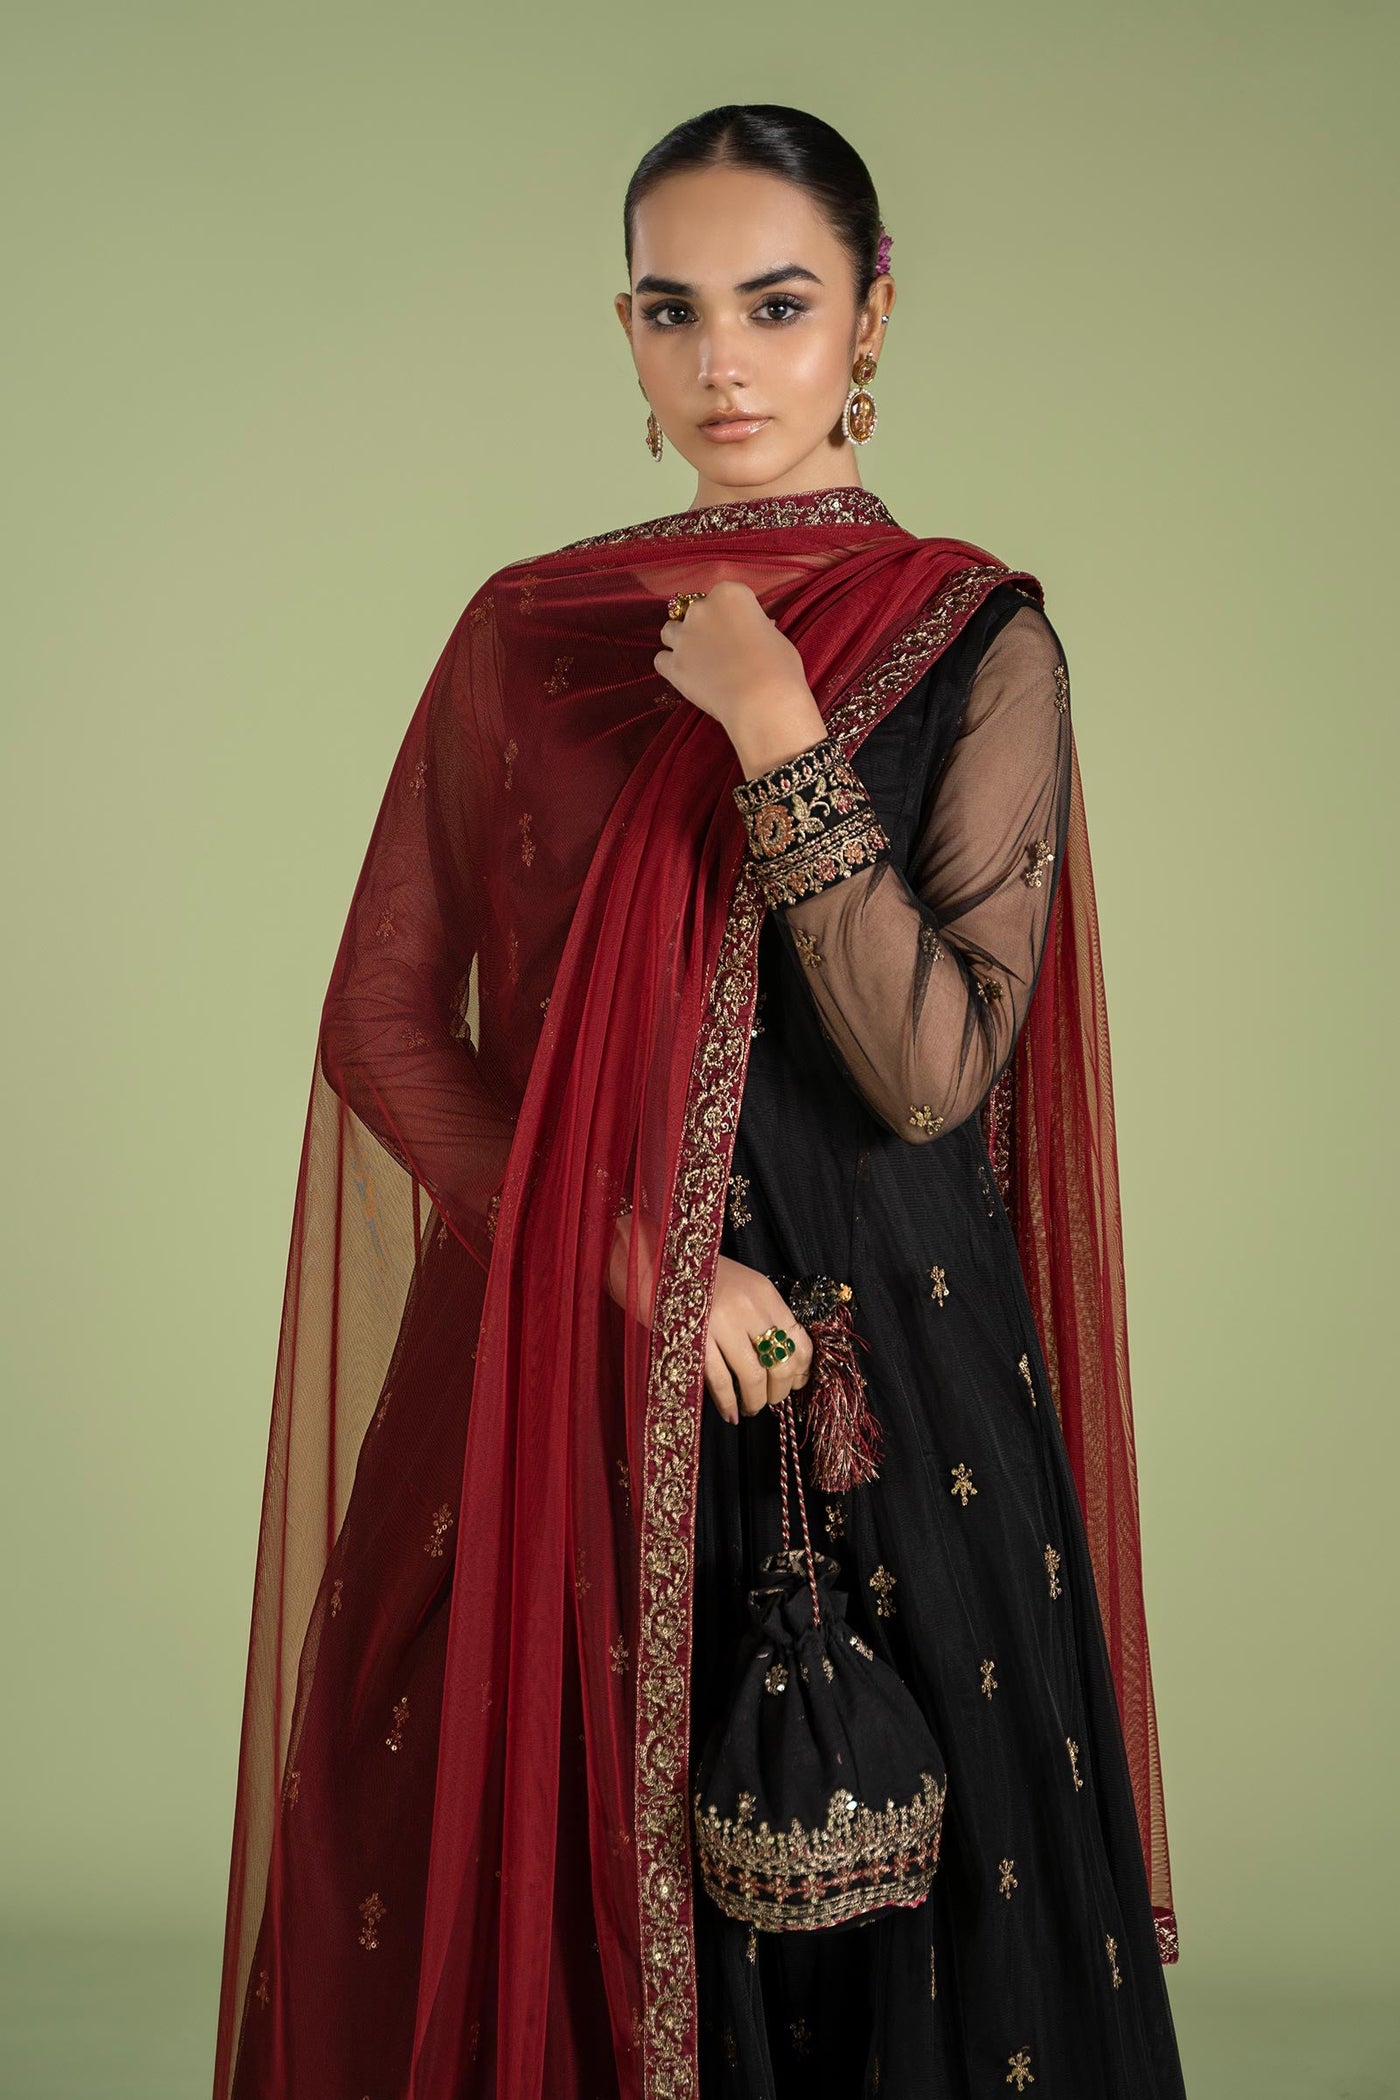 3 PIECE EMBROIDERED NET SUIT | DW-EF24-116